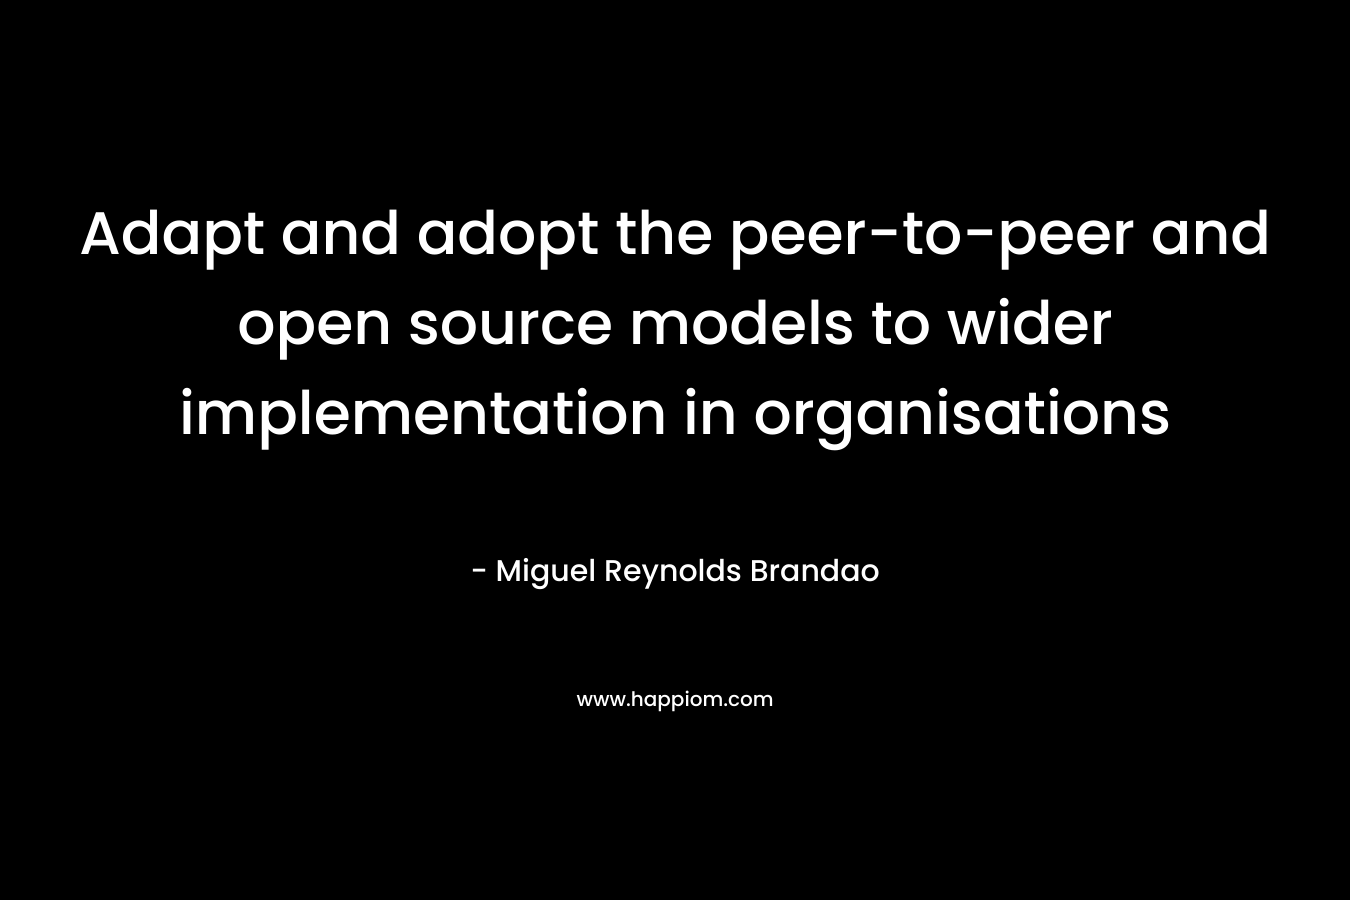 Adapt and adopt the peer-to-peer and open source models to wider implementation in organisations